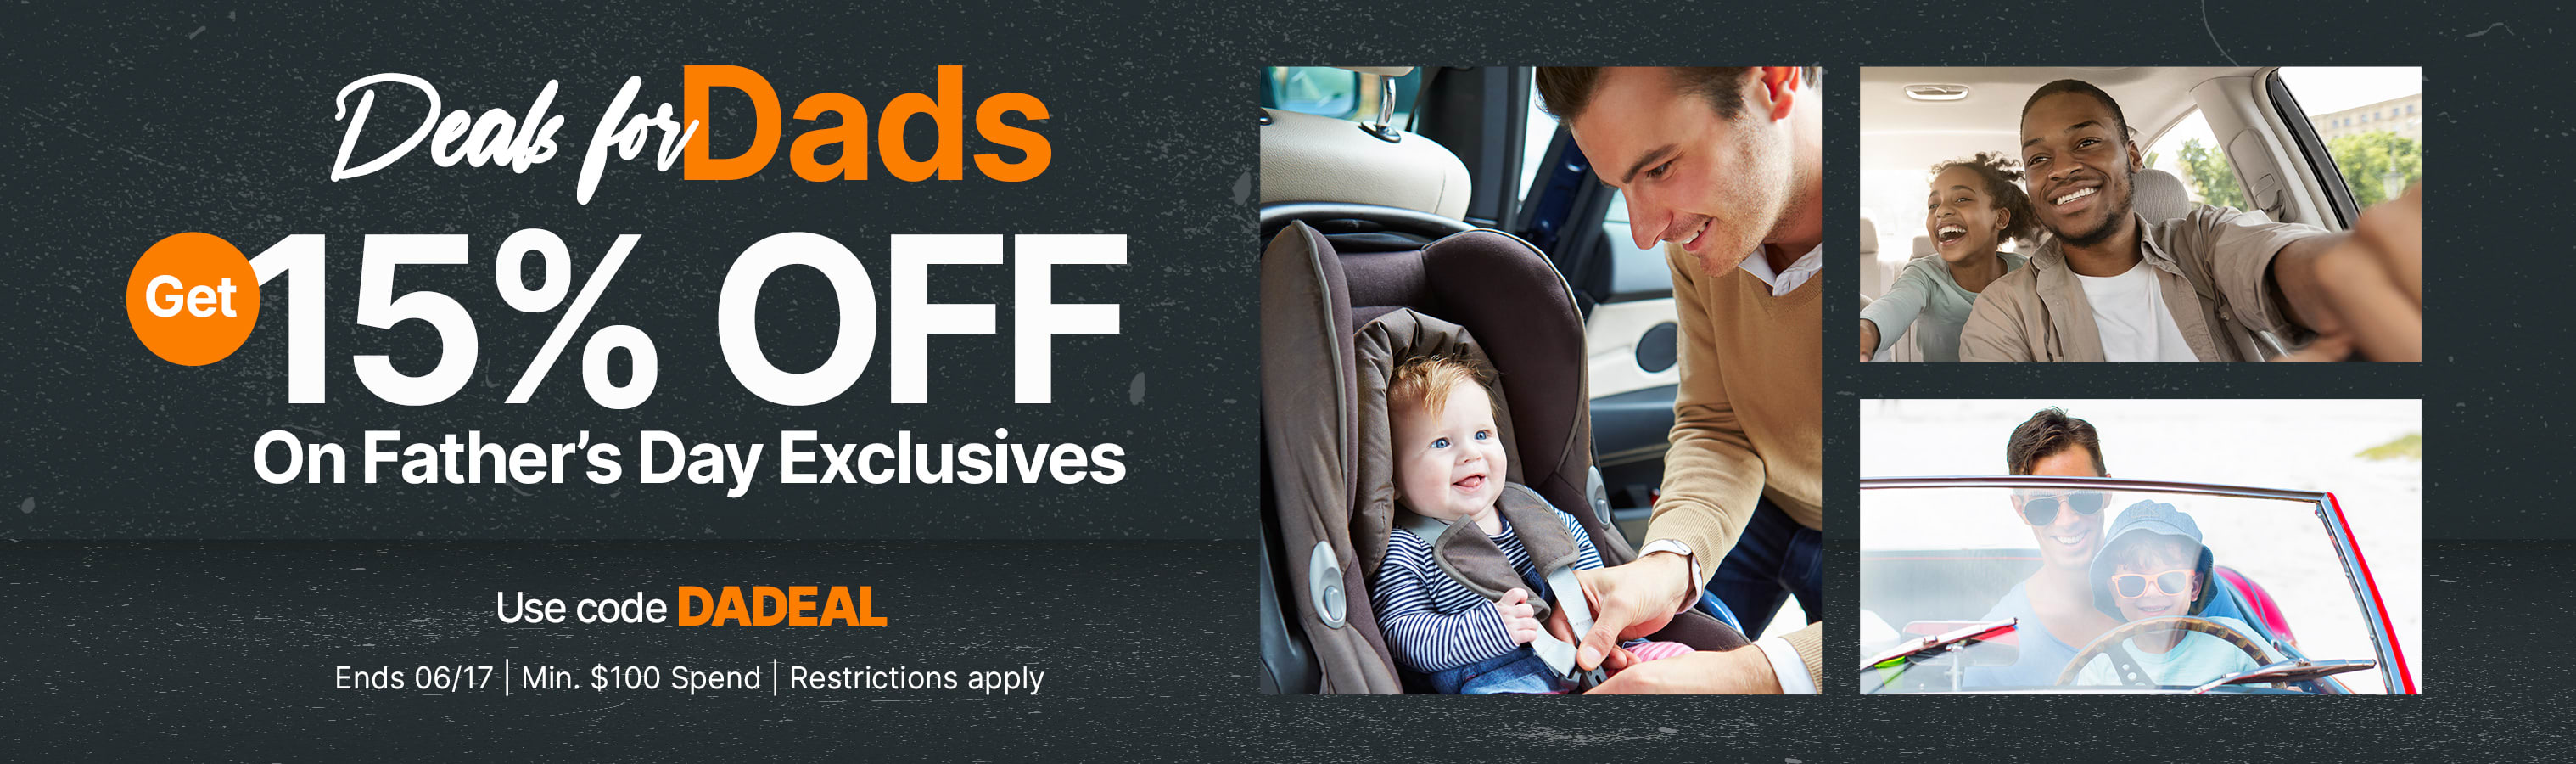 Celebrate Father's Day With Big Savings